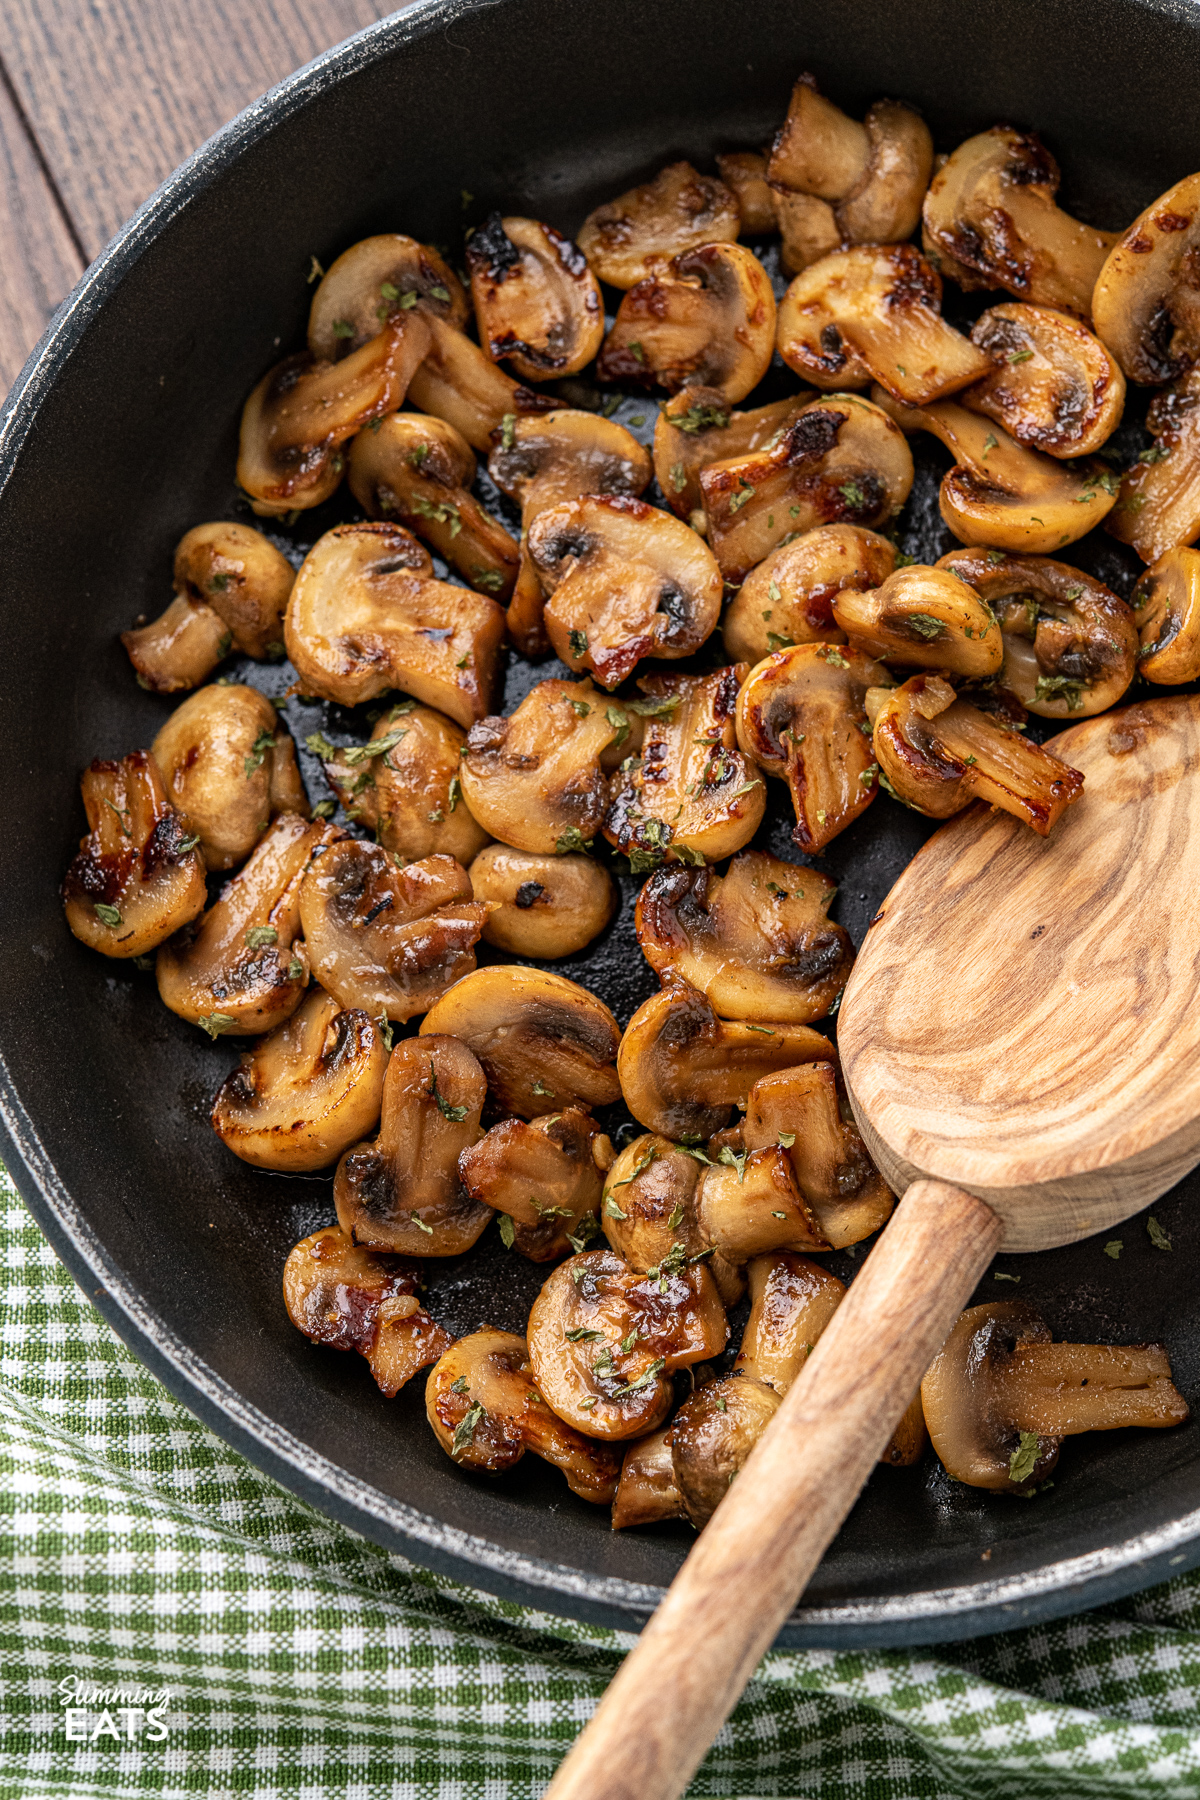 close up of sauteed mushrooms in black frying pan with wooden handle, olive wood spoon placed in pan.